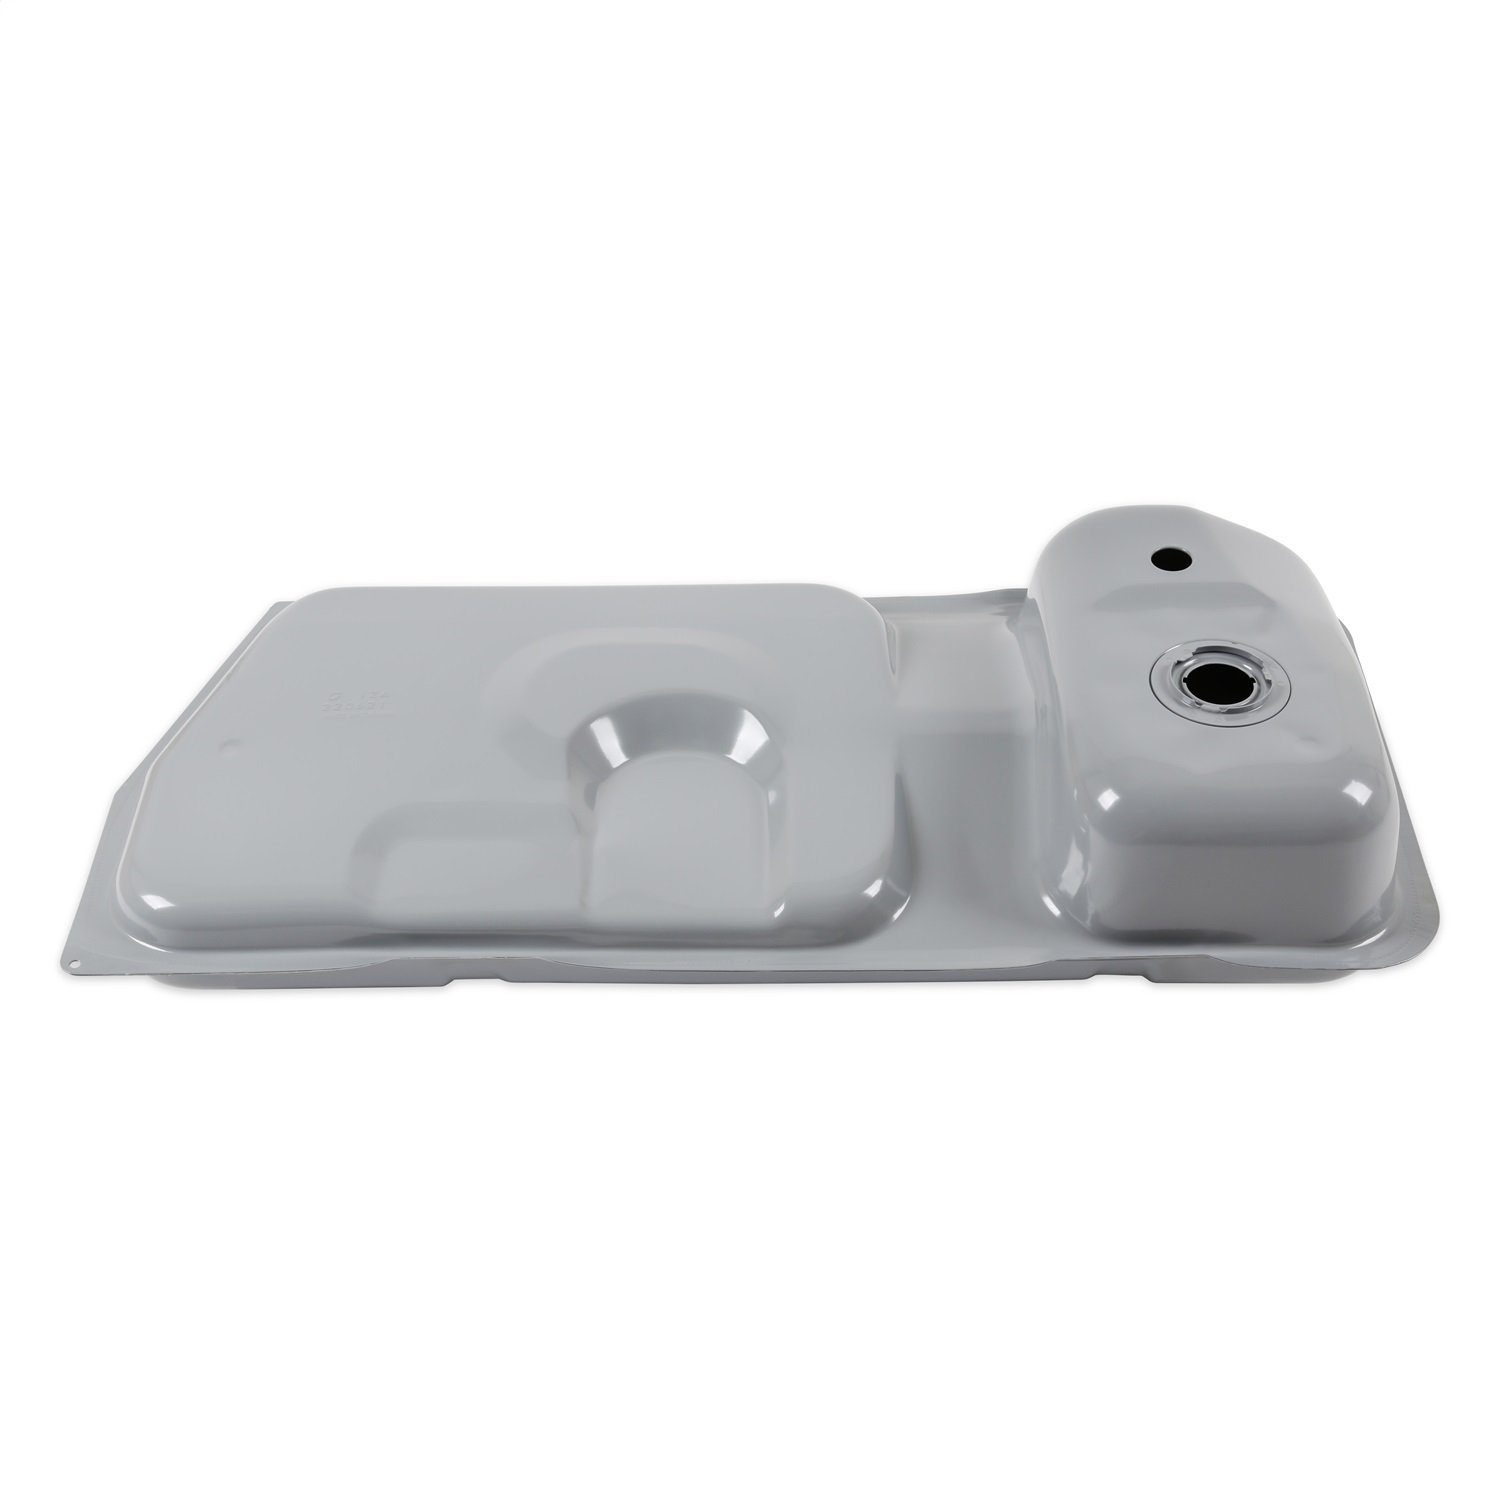 E1ZZ-9002-A Replacement Fuel Tank for 1981-1986 Ford Mustang [Non-EFI]